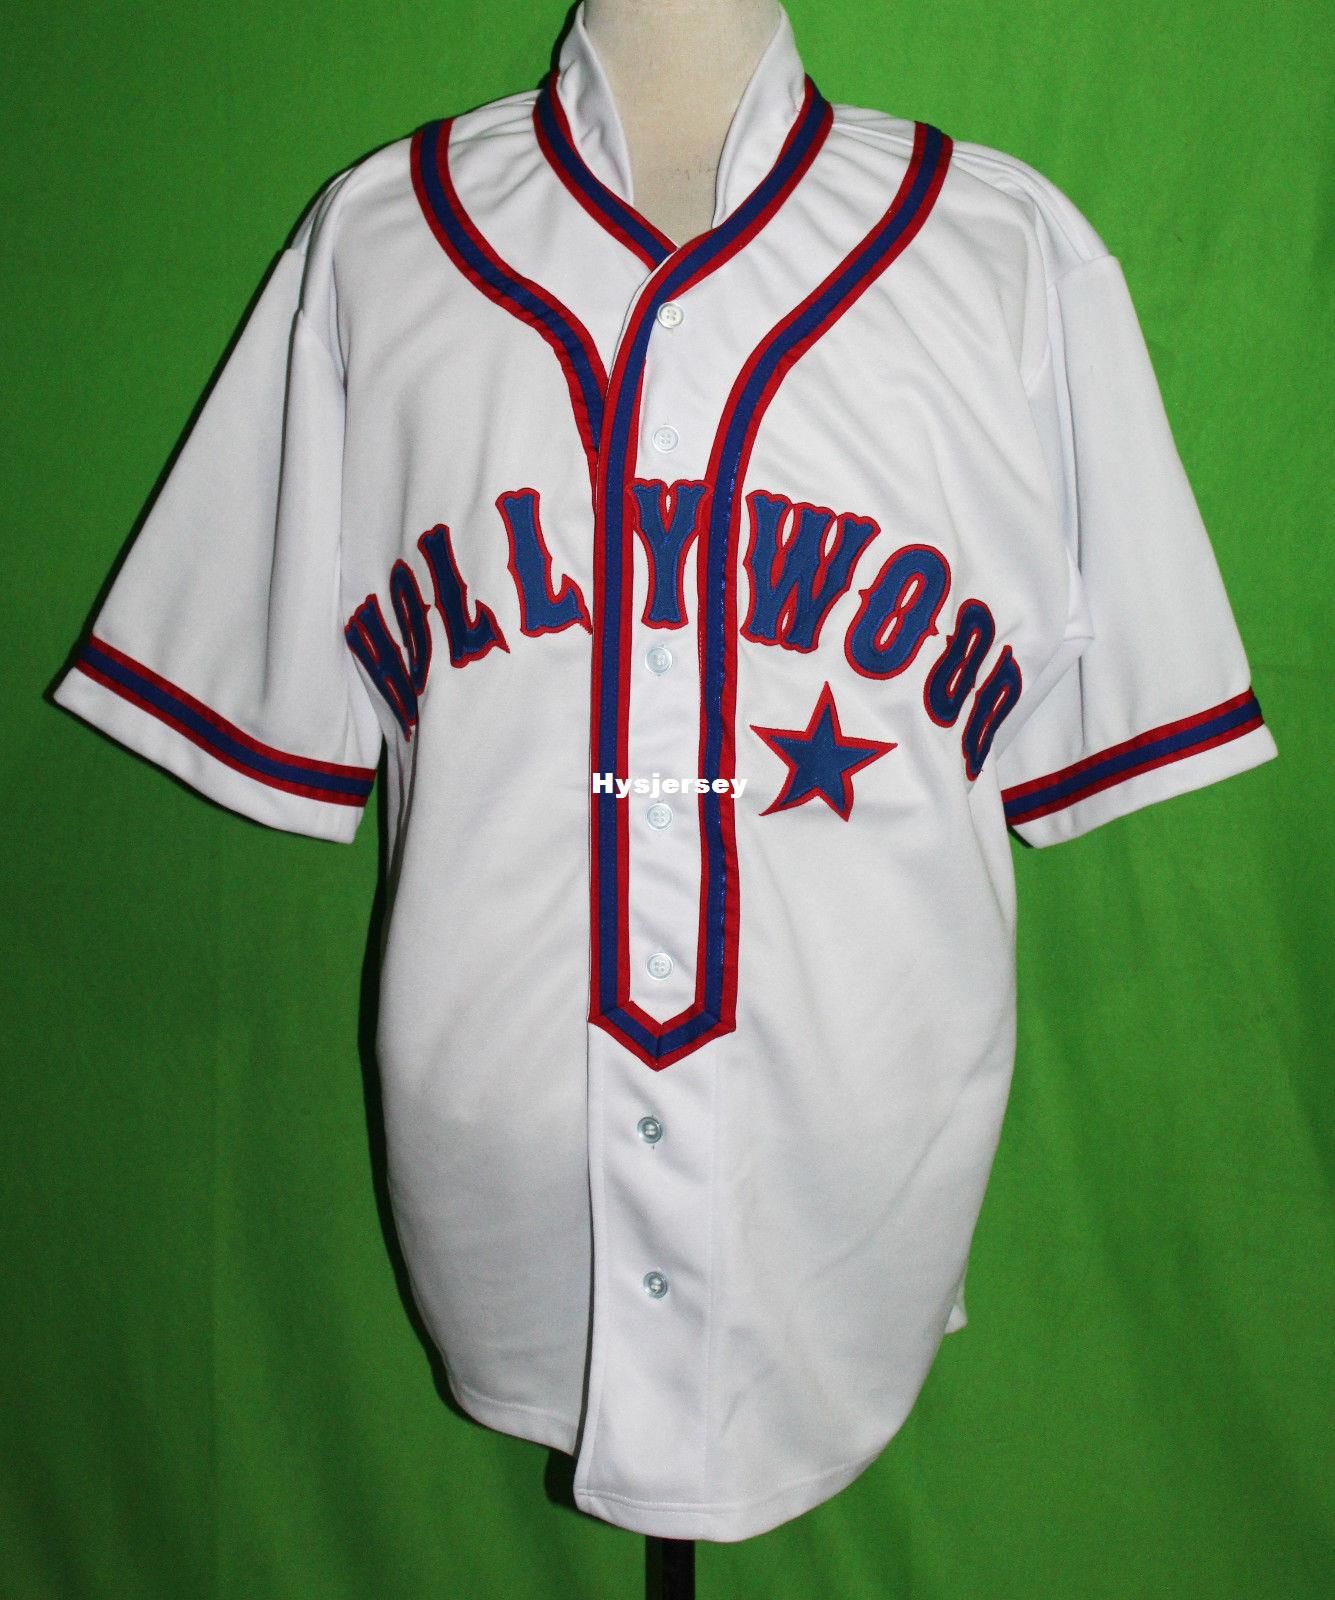 Cheap Retro HOLLYWOOD STARS #5 1940 Home BASEBALL JERSEY Or Custom Any  Number Any Mens Vintage Jerseys XS 5XL From Hysjersey, $20.06